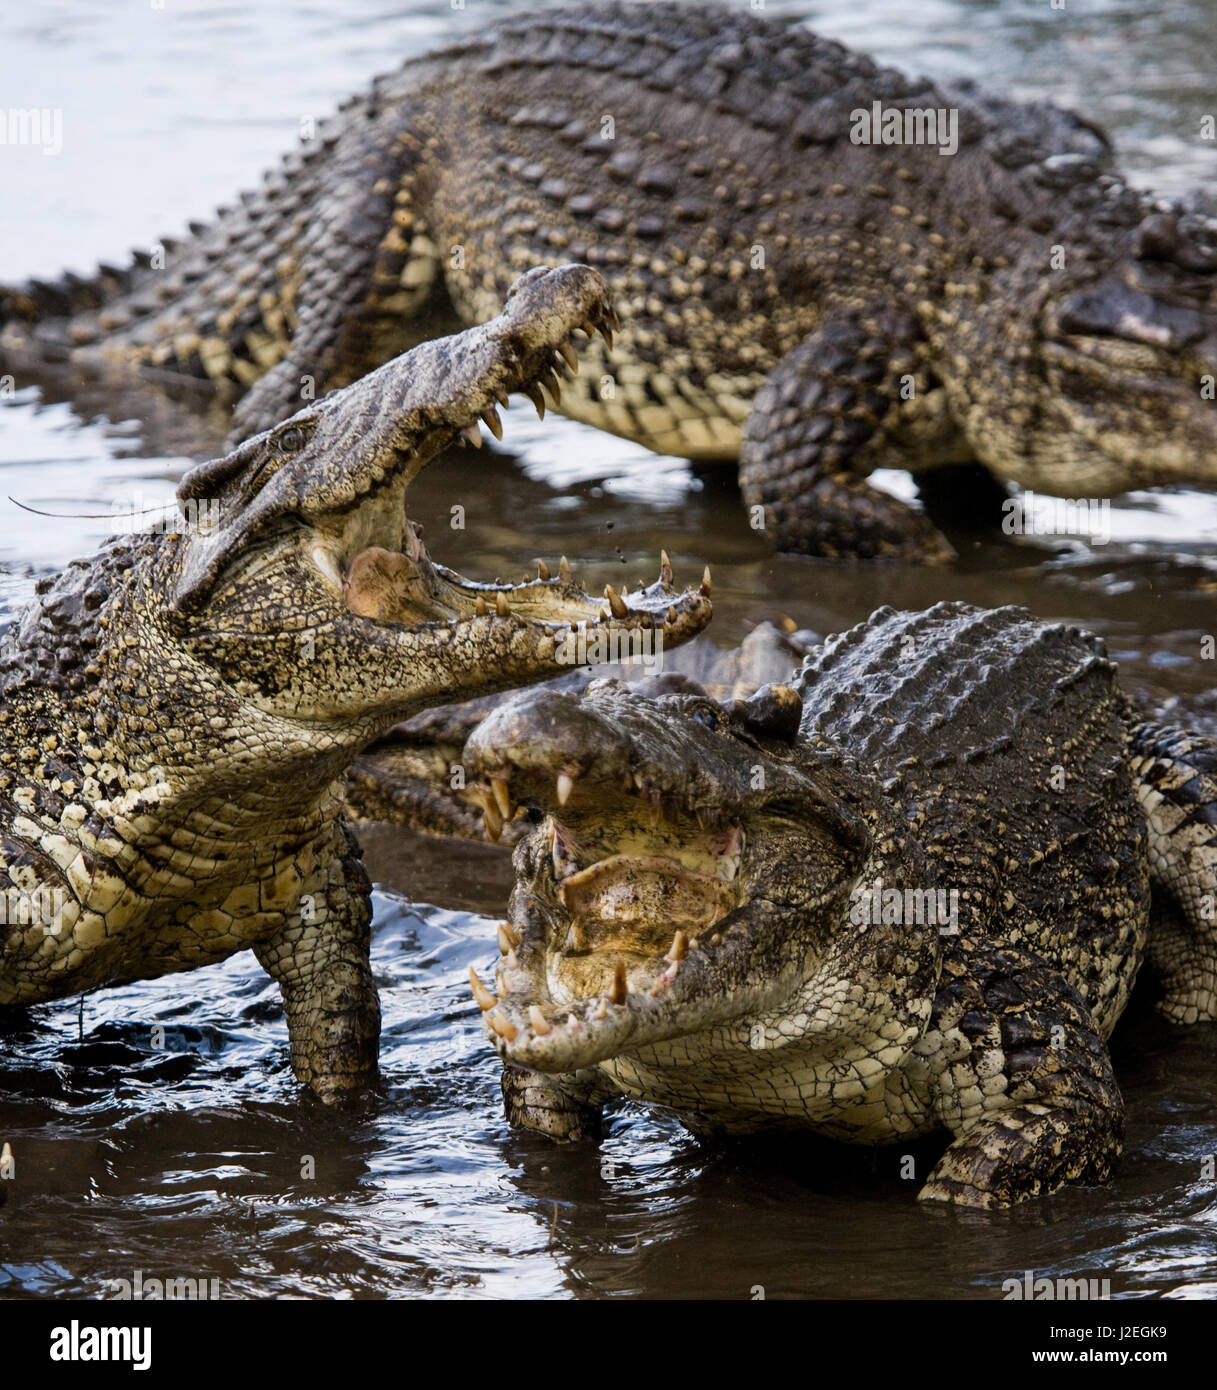 The Cuban crocodile jumps out of the water. A rare photograph. Cuba. An excellent illustration. Unusual angle. Stock Photo